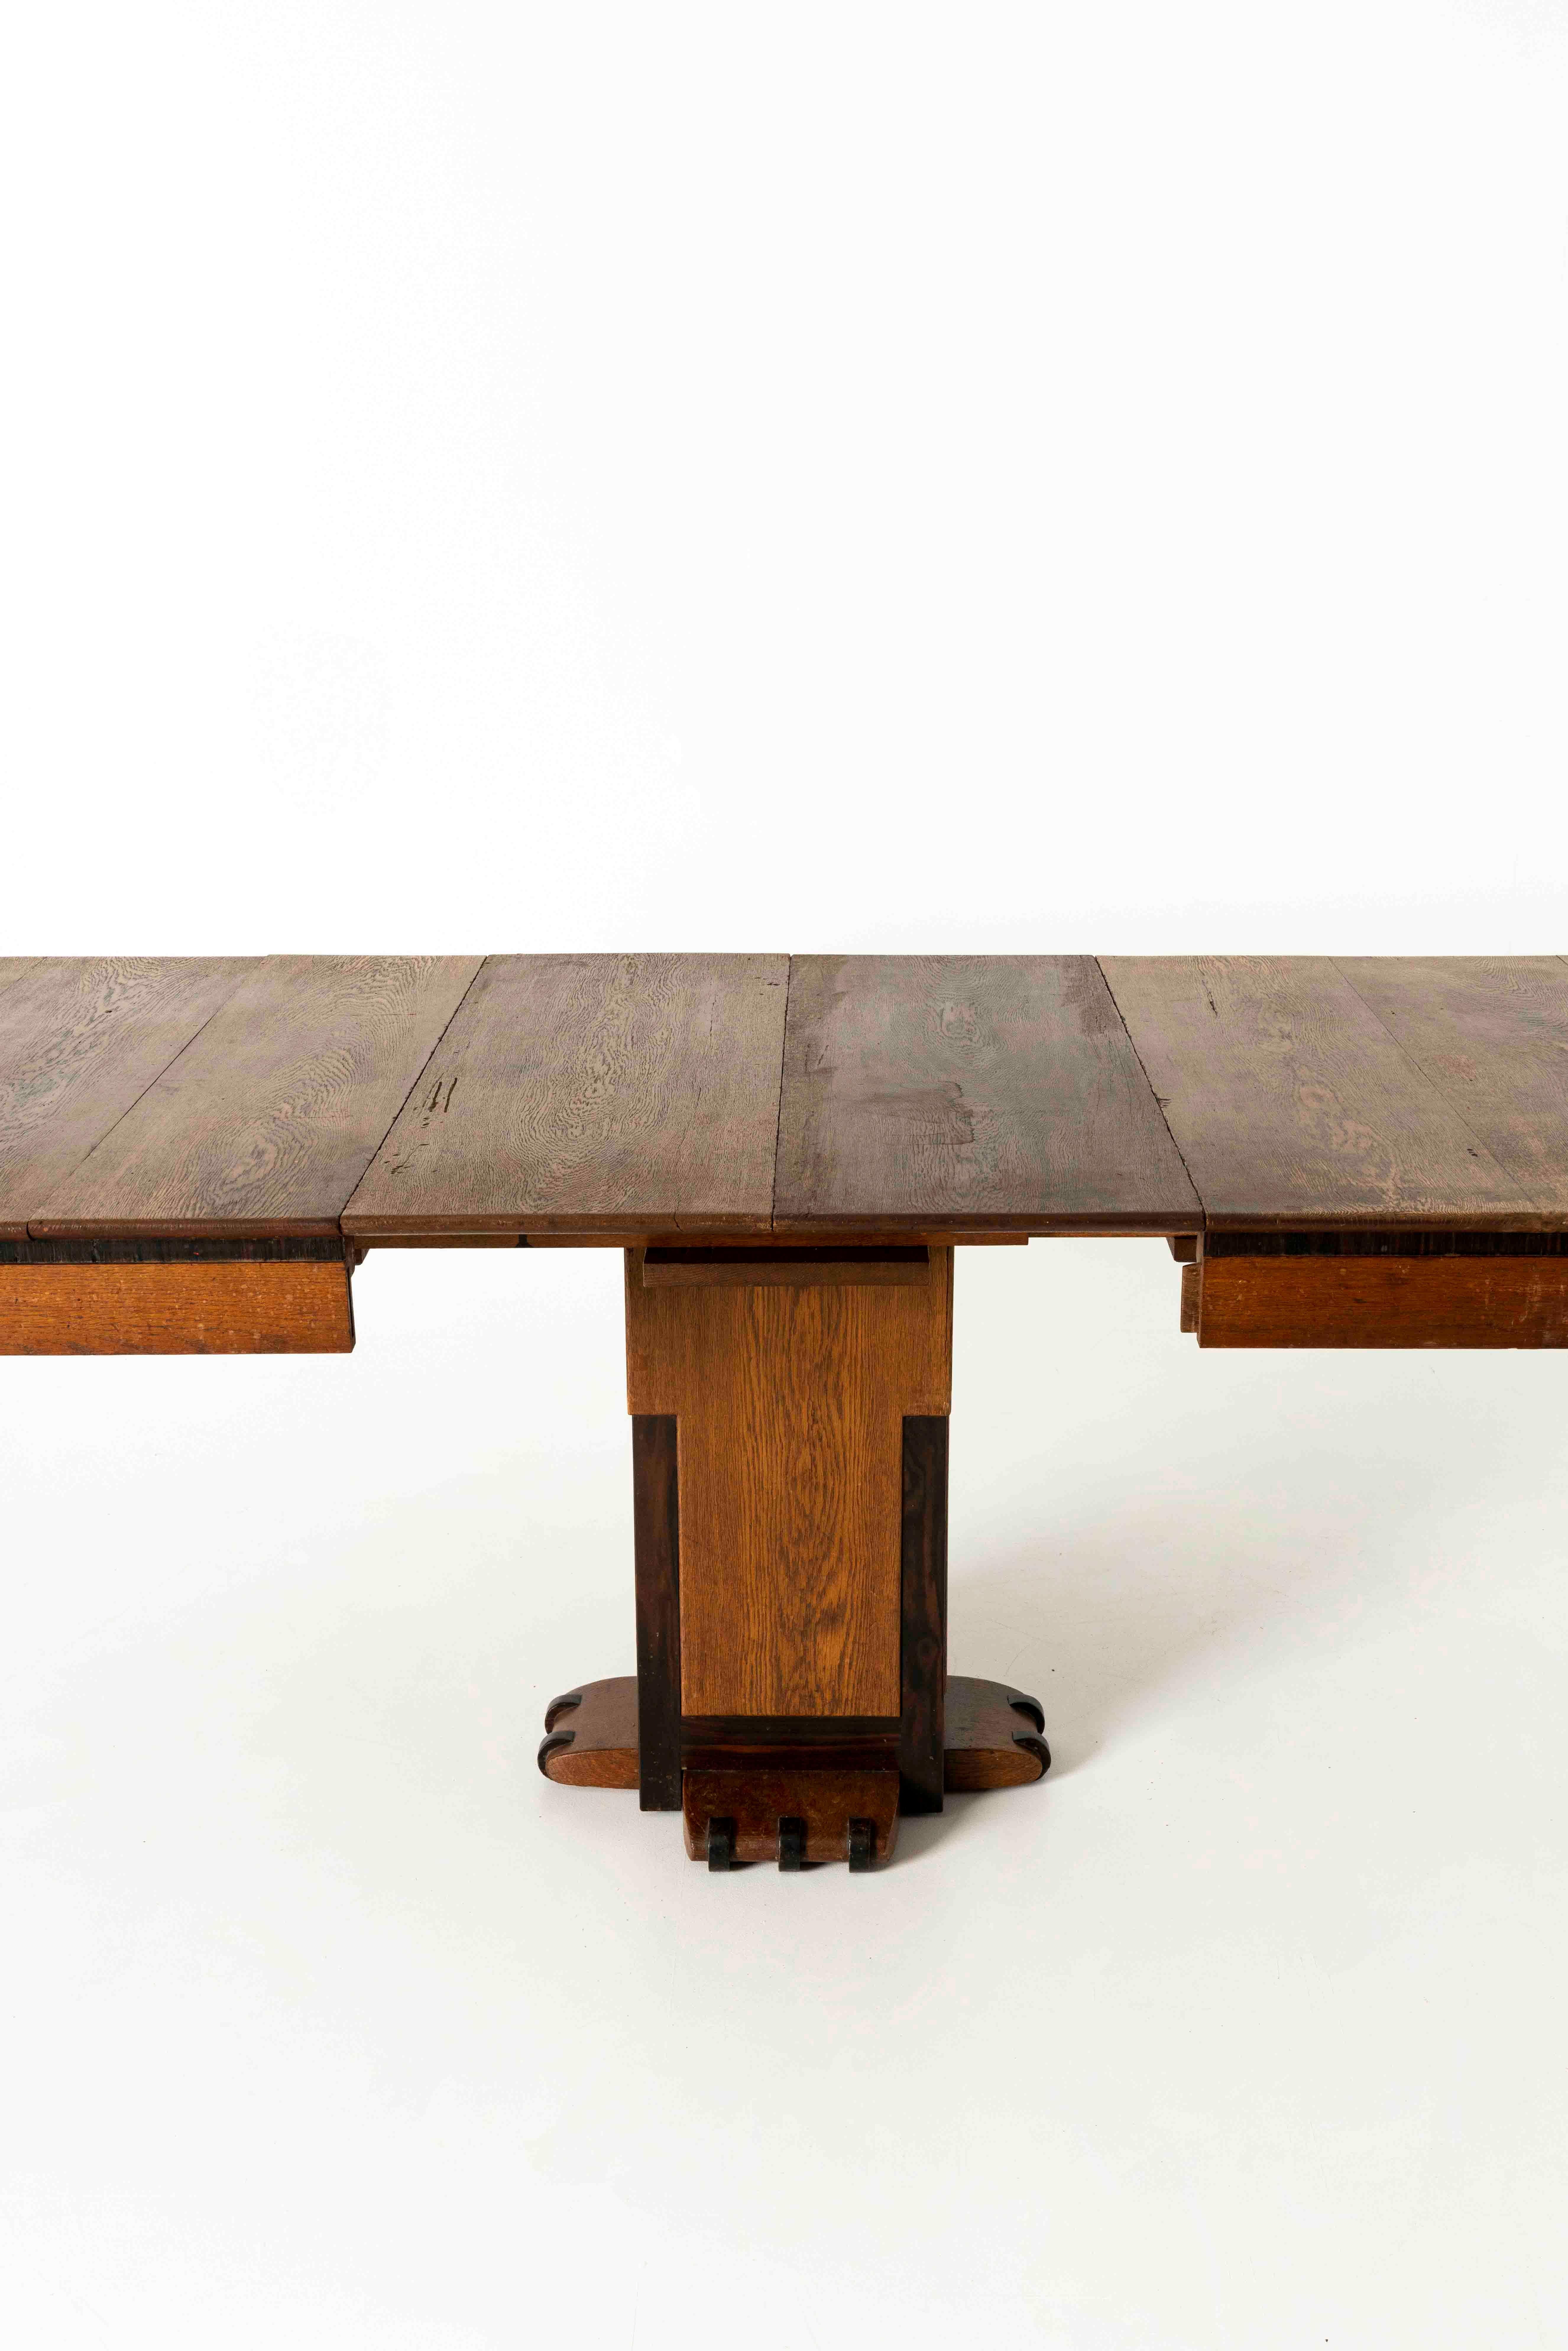 The Hague School Extendable Dining Table, 1920s 4